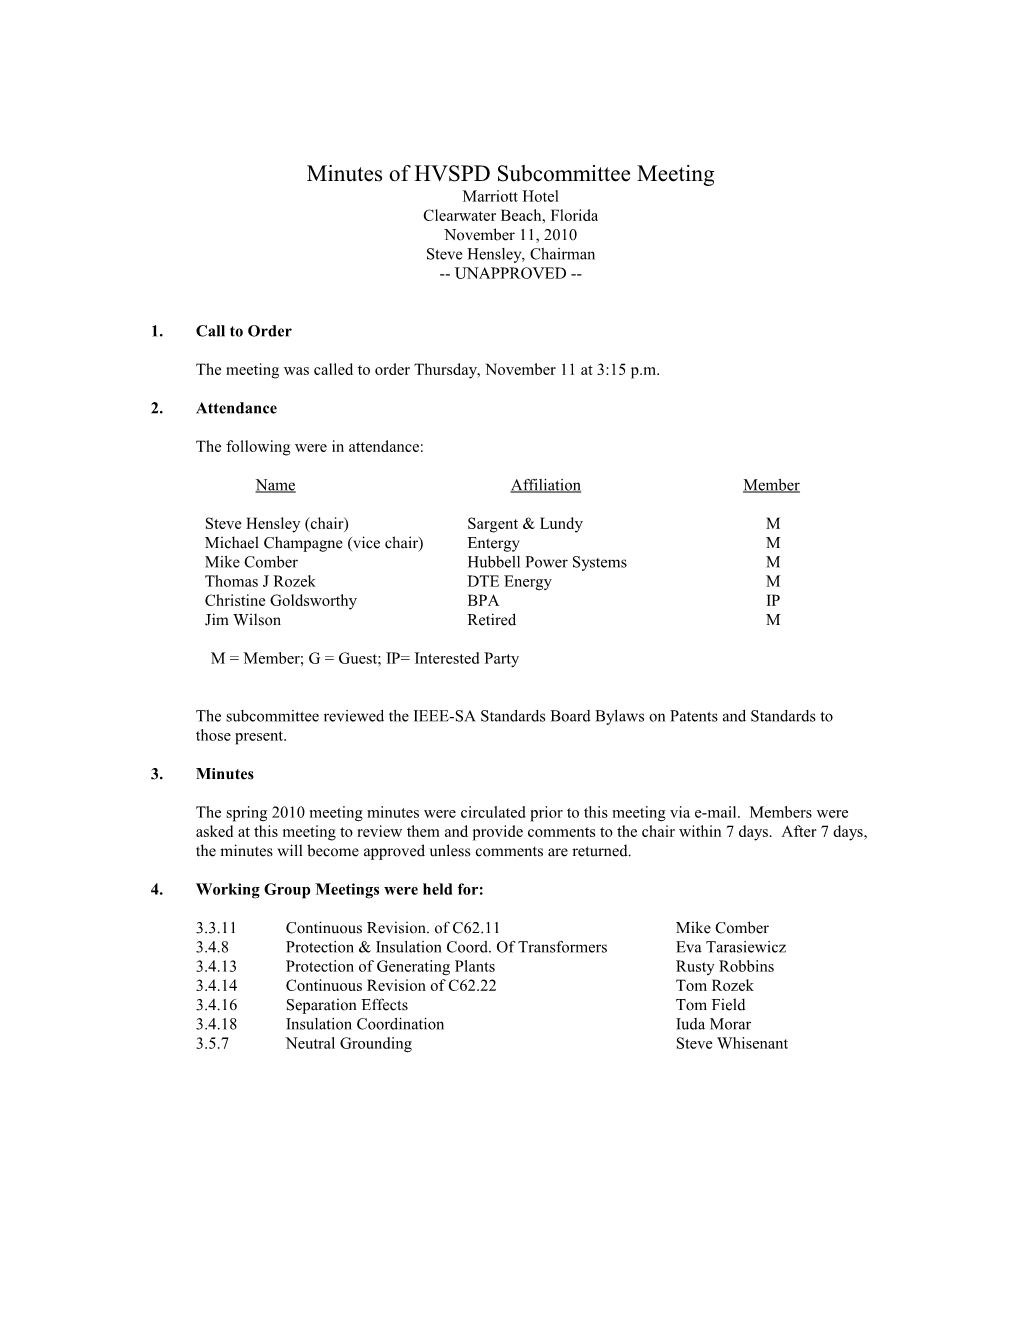 Minutes of HVSPD Subcommittee Meeting